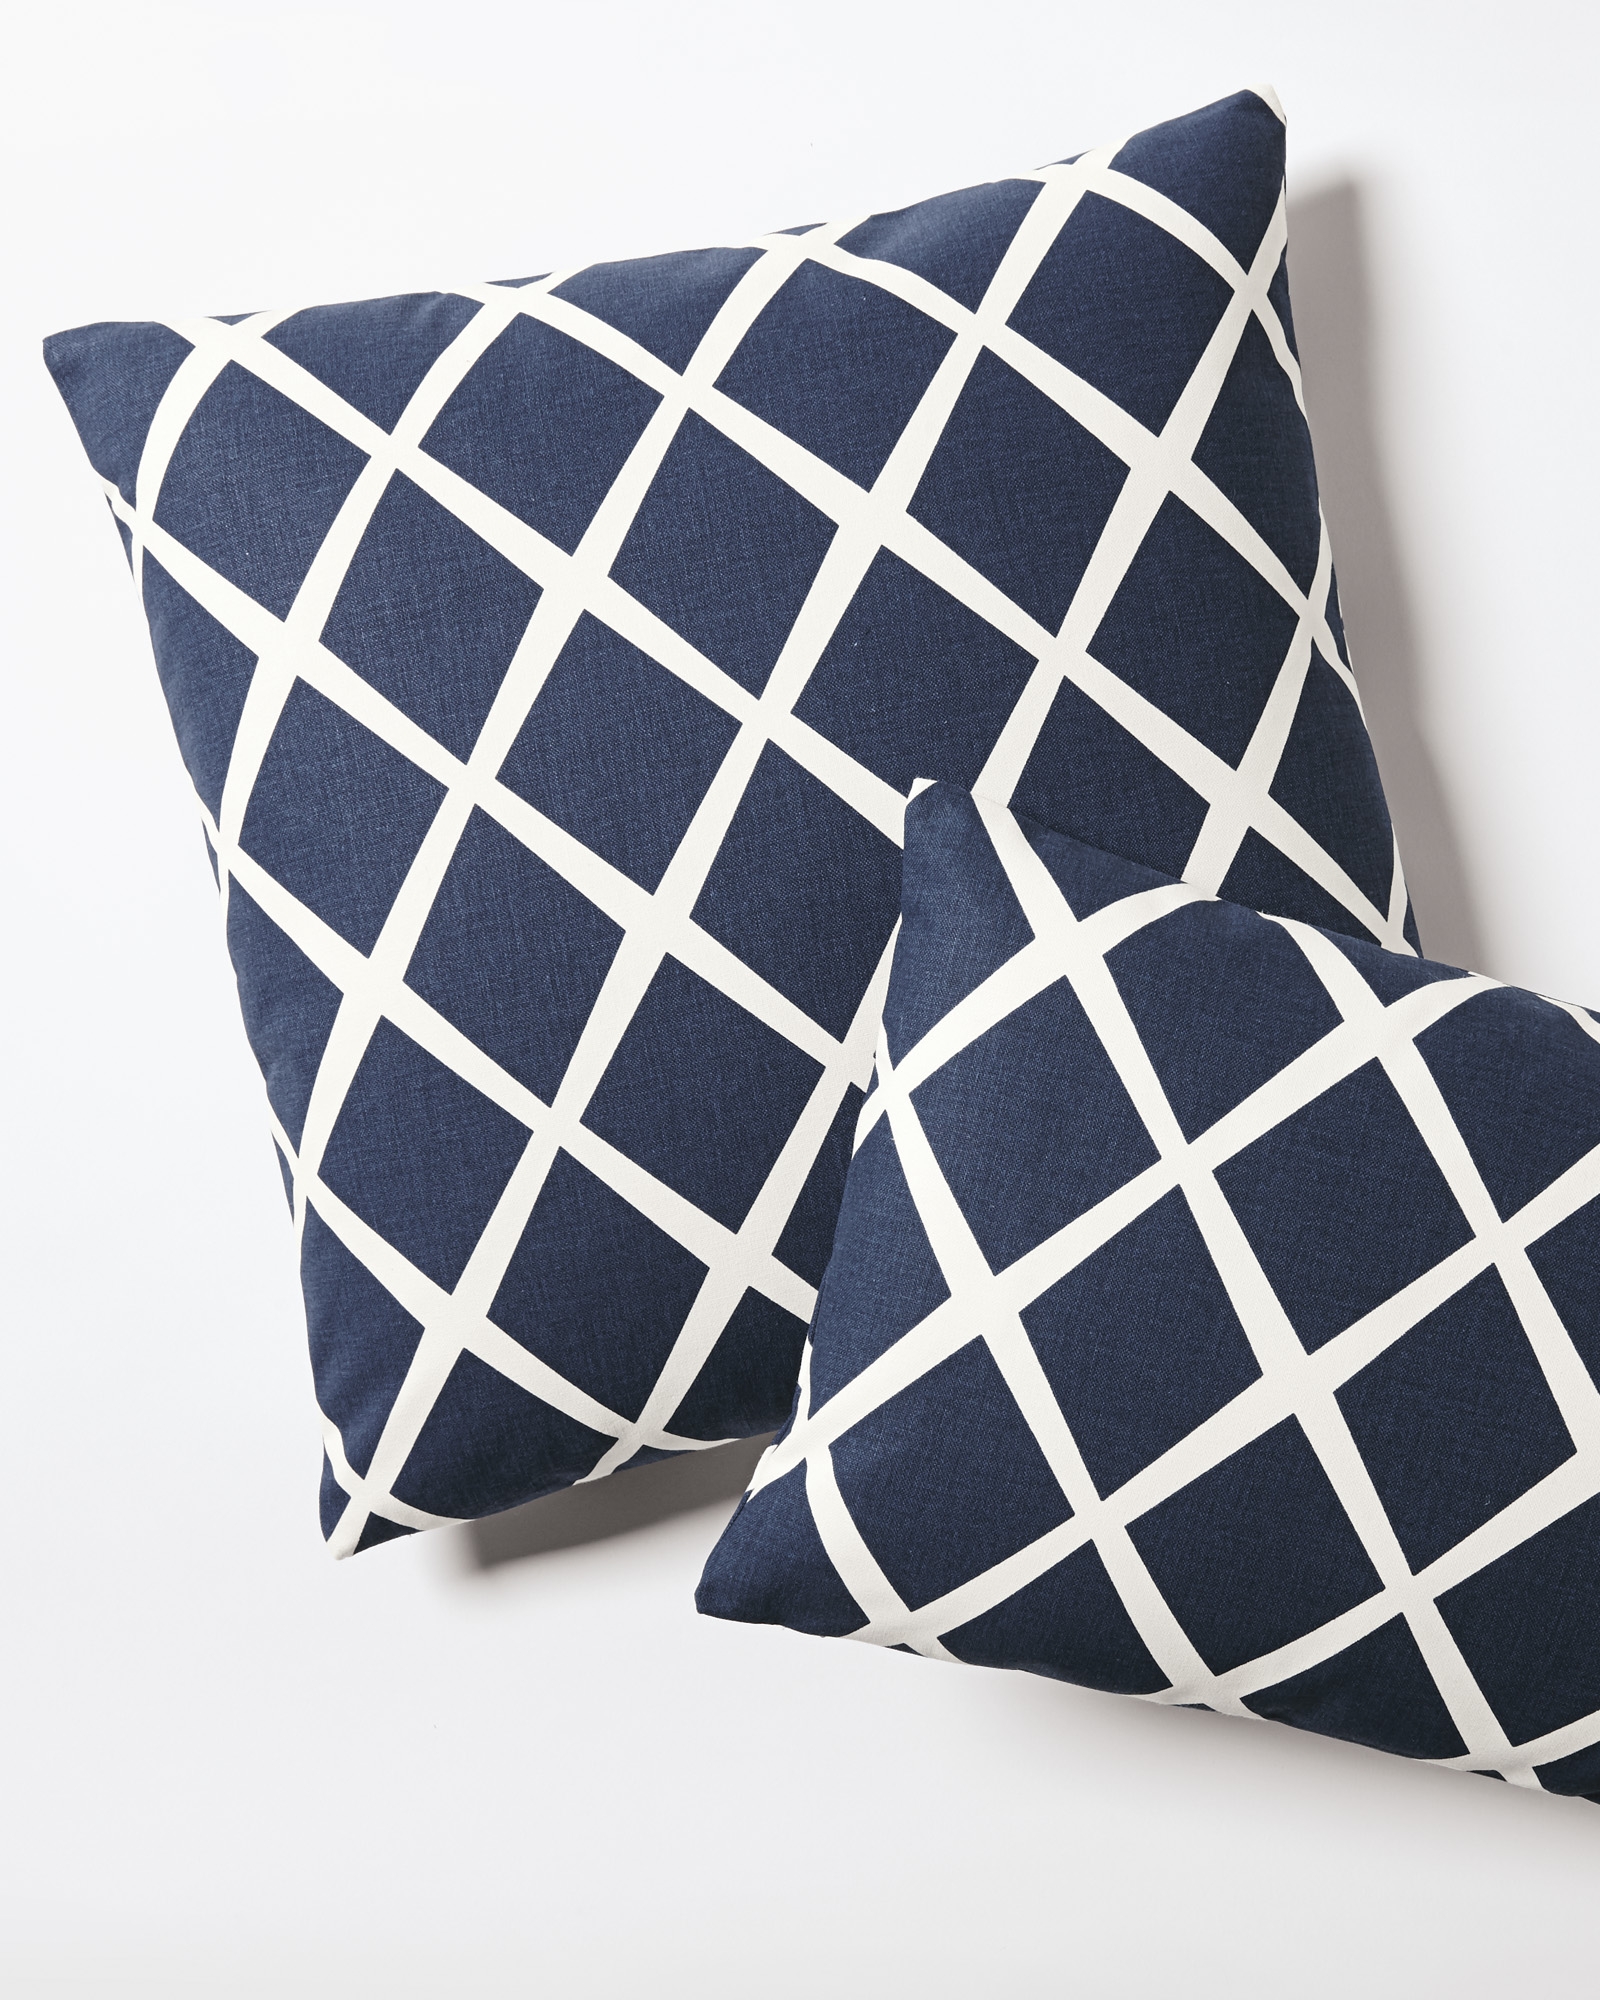 Diamond Pillow Cover - Navy - 20"x20" - Insert Sold Separately - Image 1